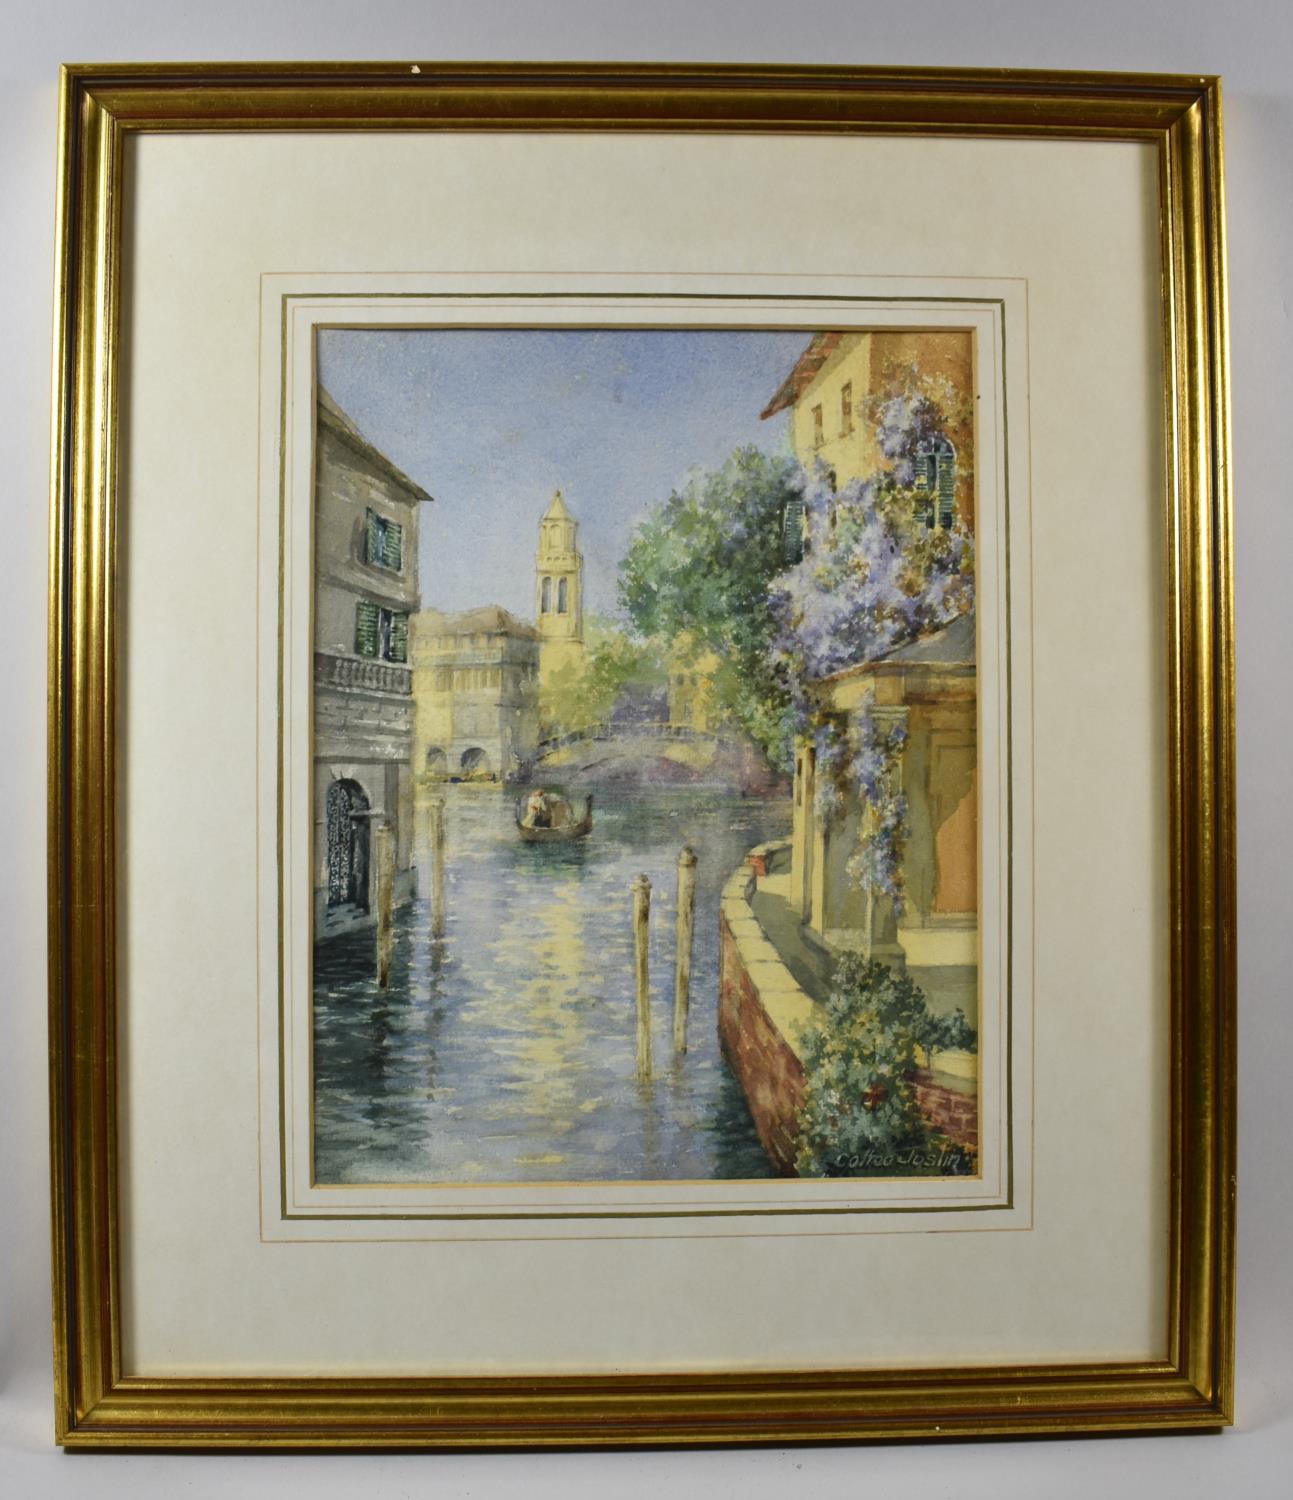 A Framed Watercolour Depicting Venice Canal With Gondola, Signed Joslin, 32x25cm